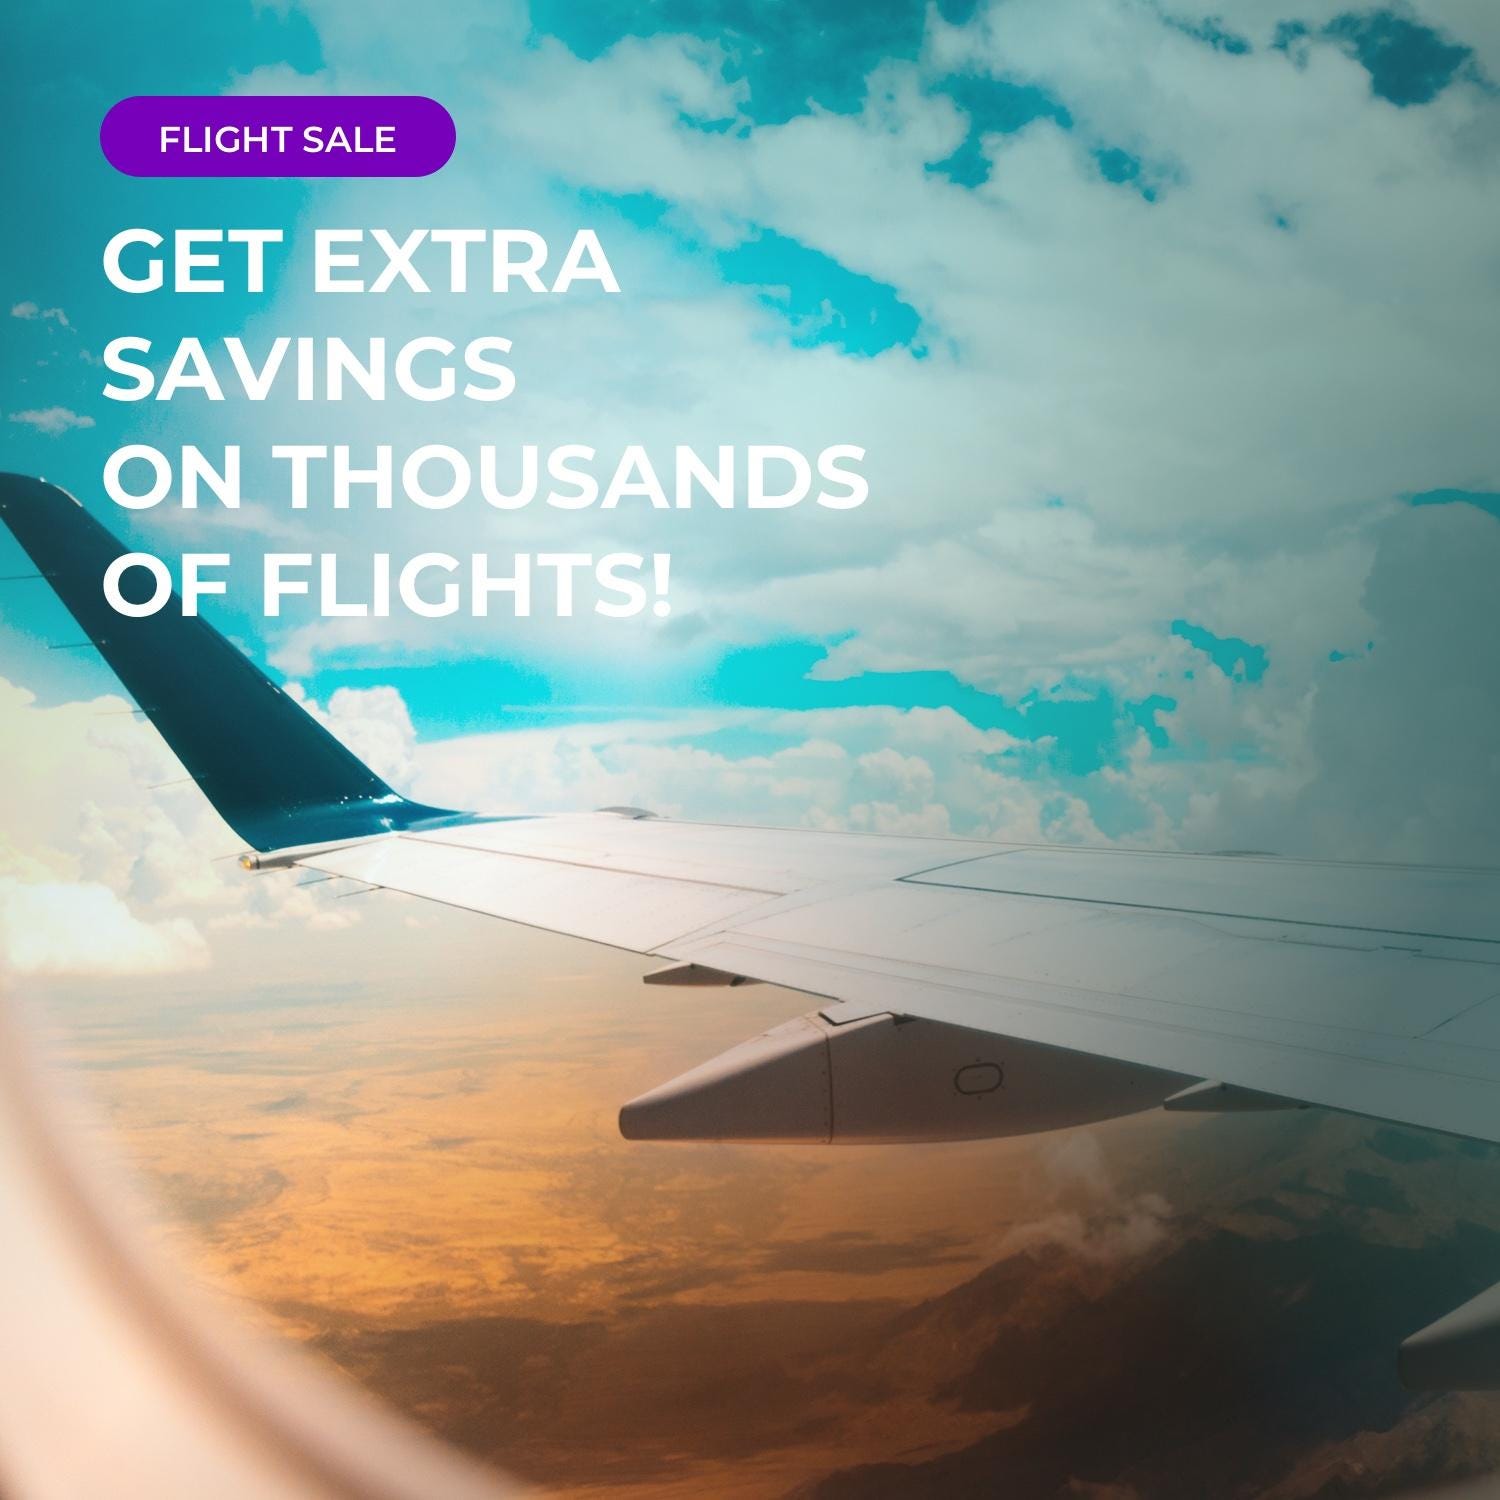 ?? Experience the thrill of wanderlust with CheapAir’s unbeatable flig